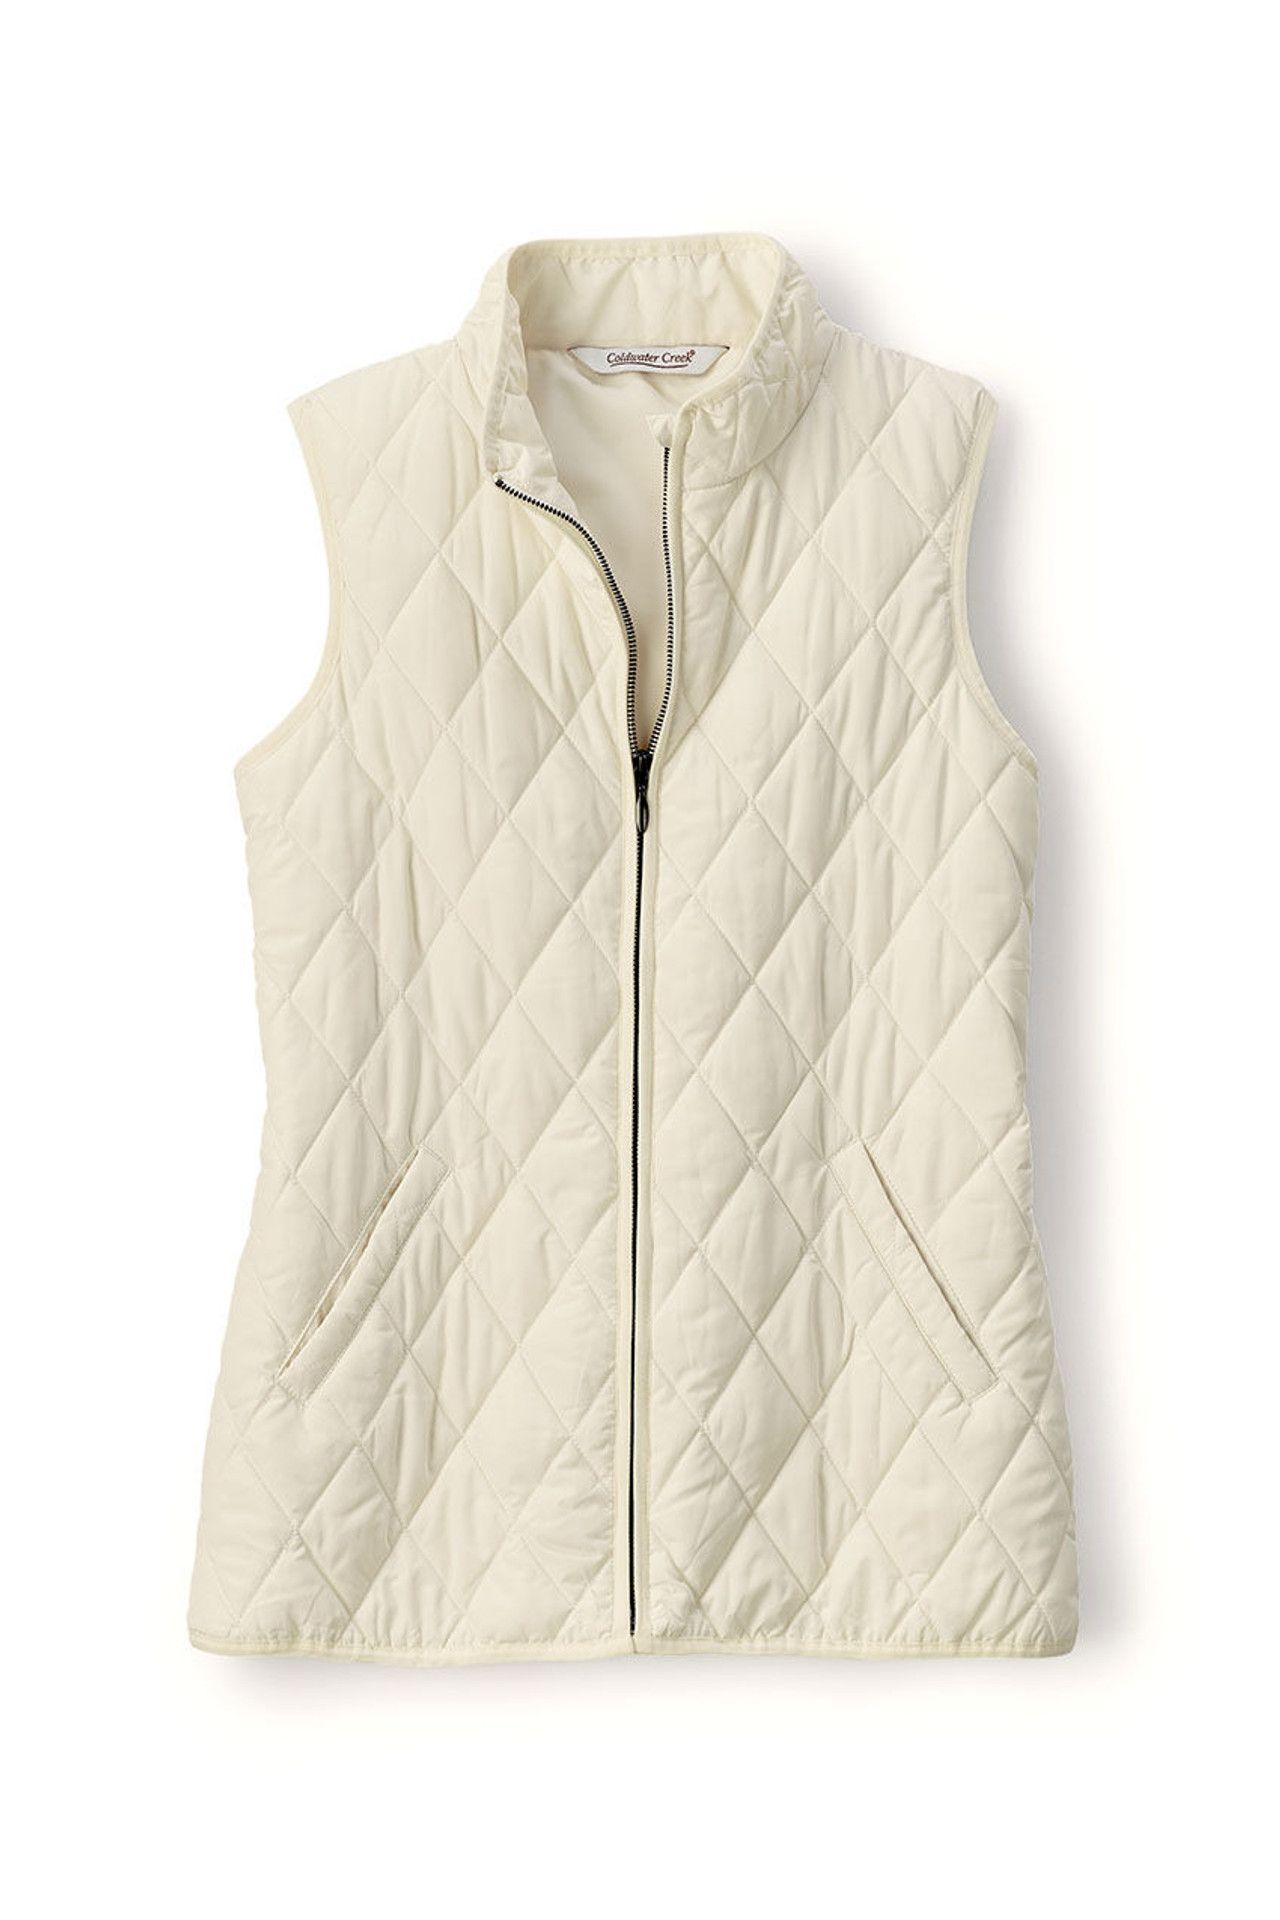 Vest for All Seasons | Coldwater Creek